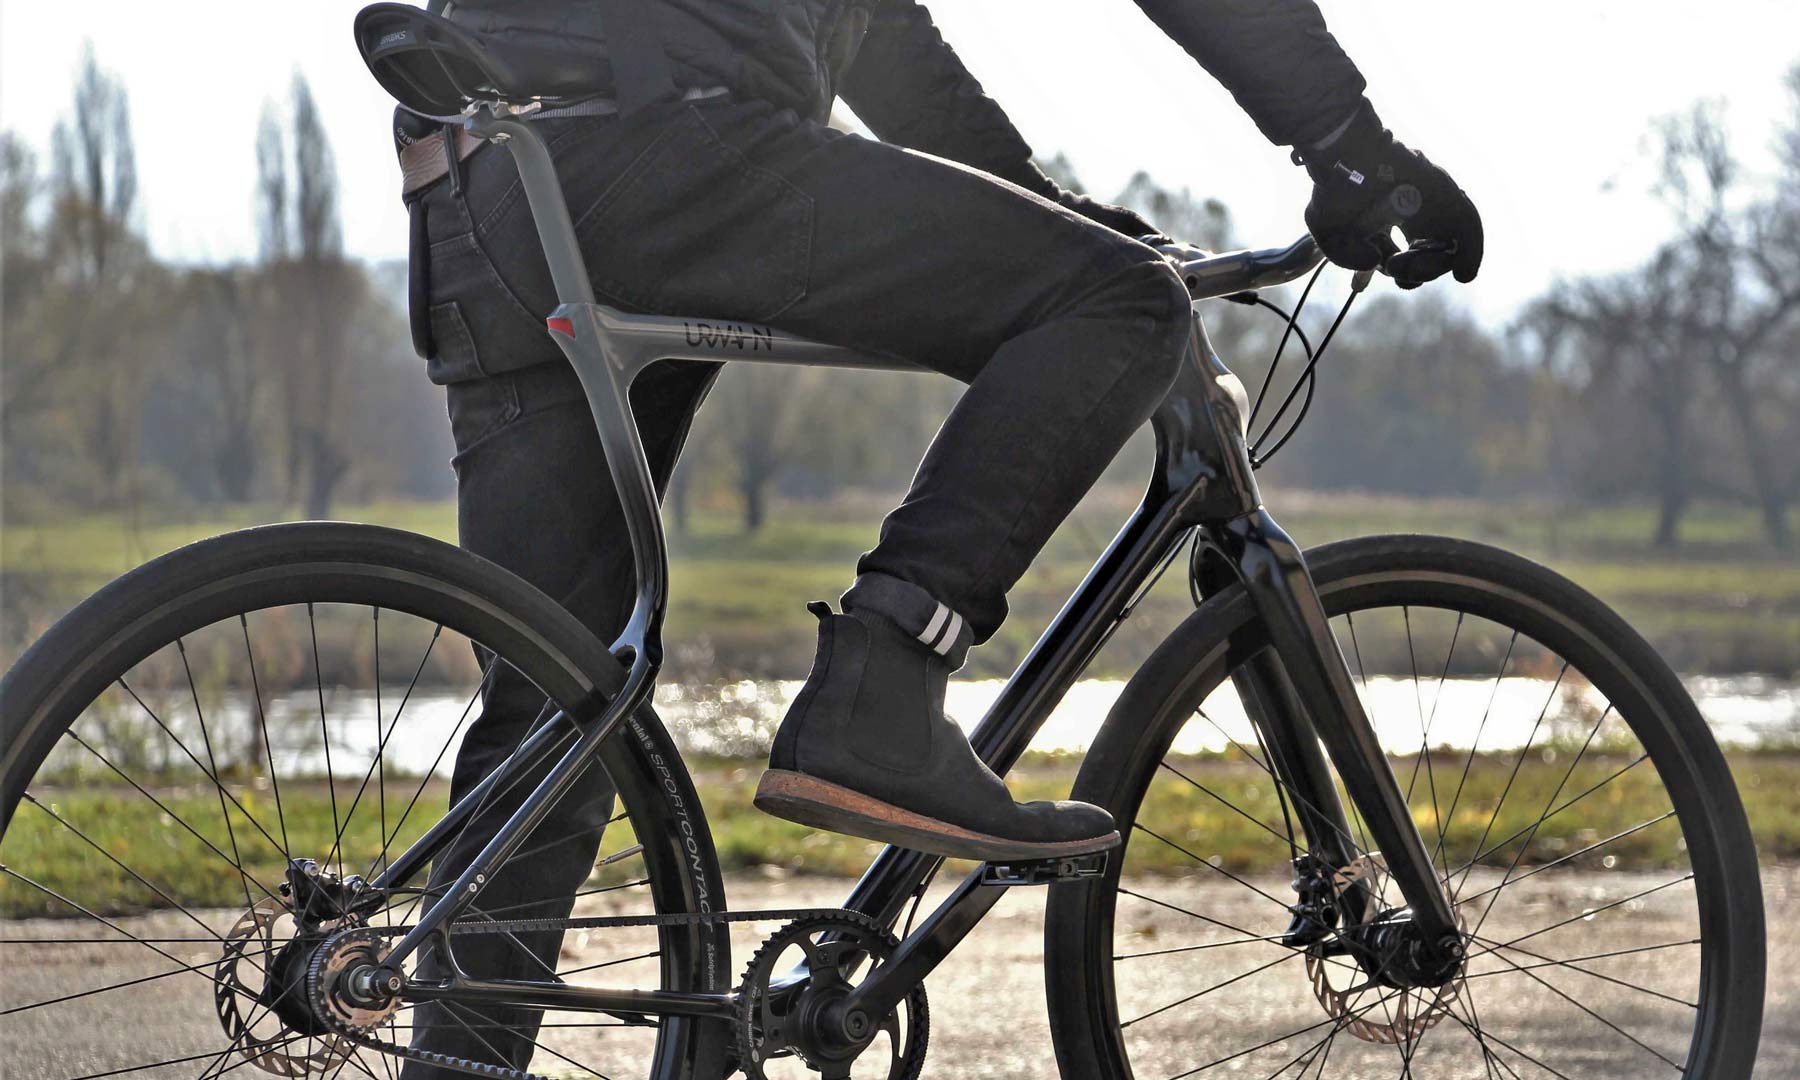 Urwahn offering limited edition preorders of unique no-seattube commuter bike